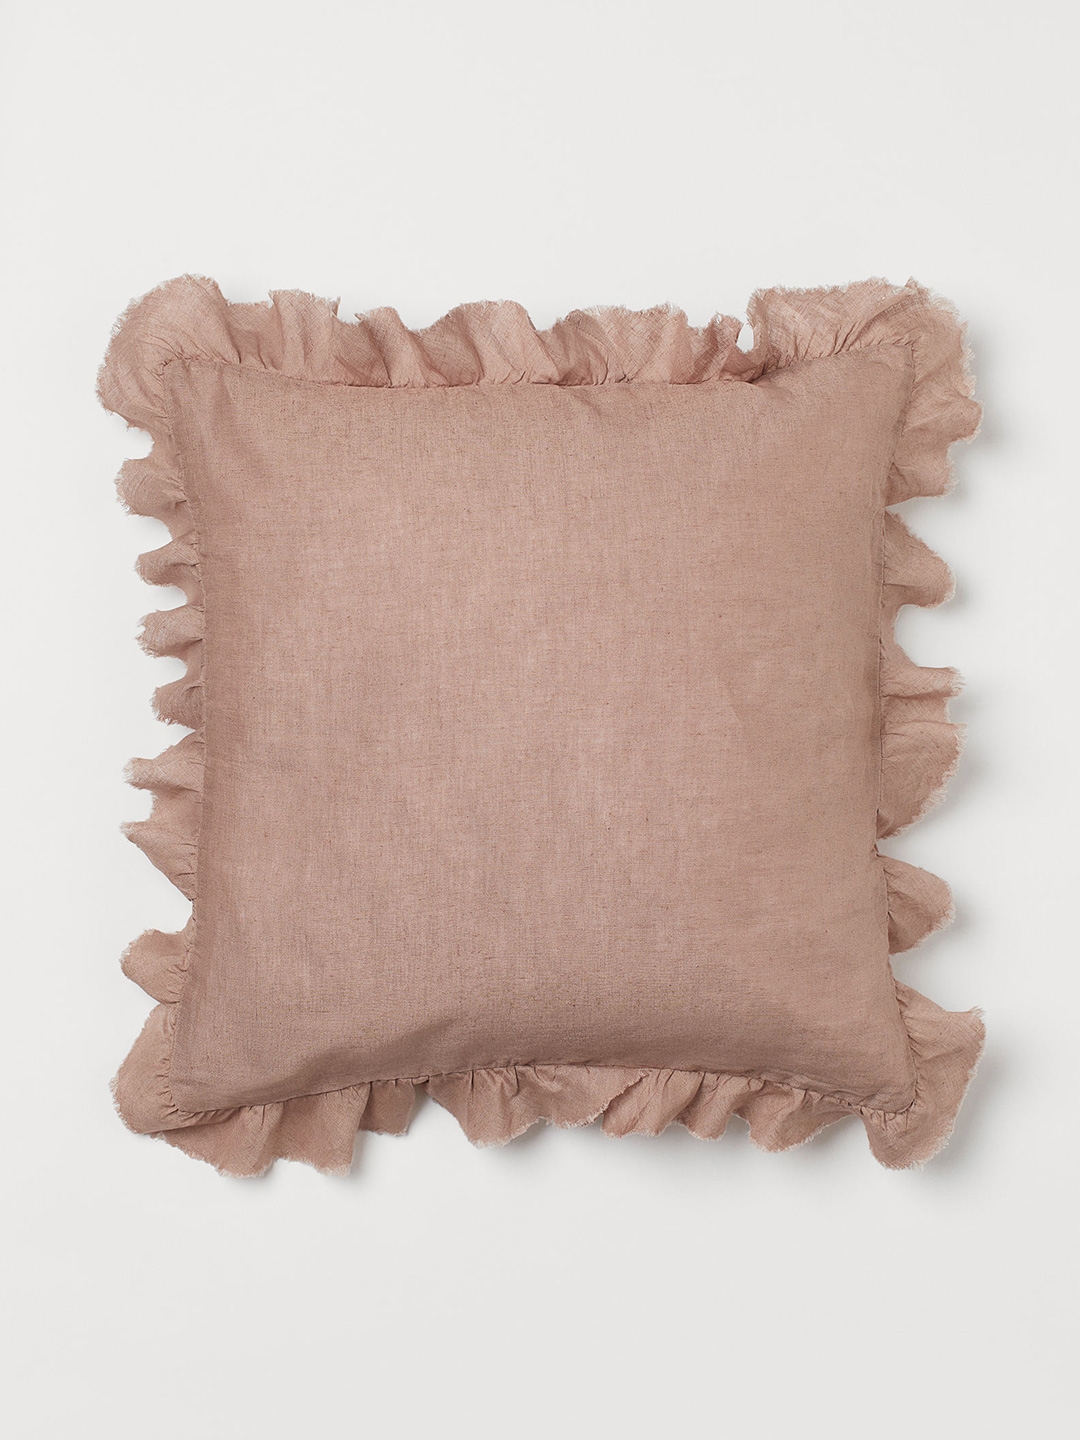 H&M Pink Linen Cushion Cover